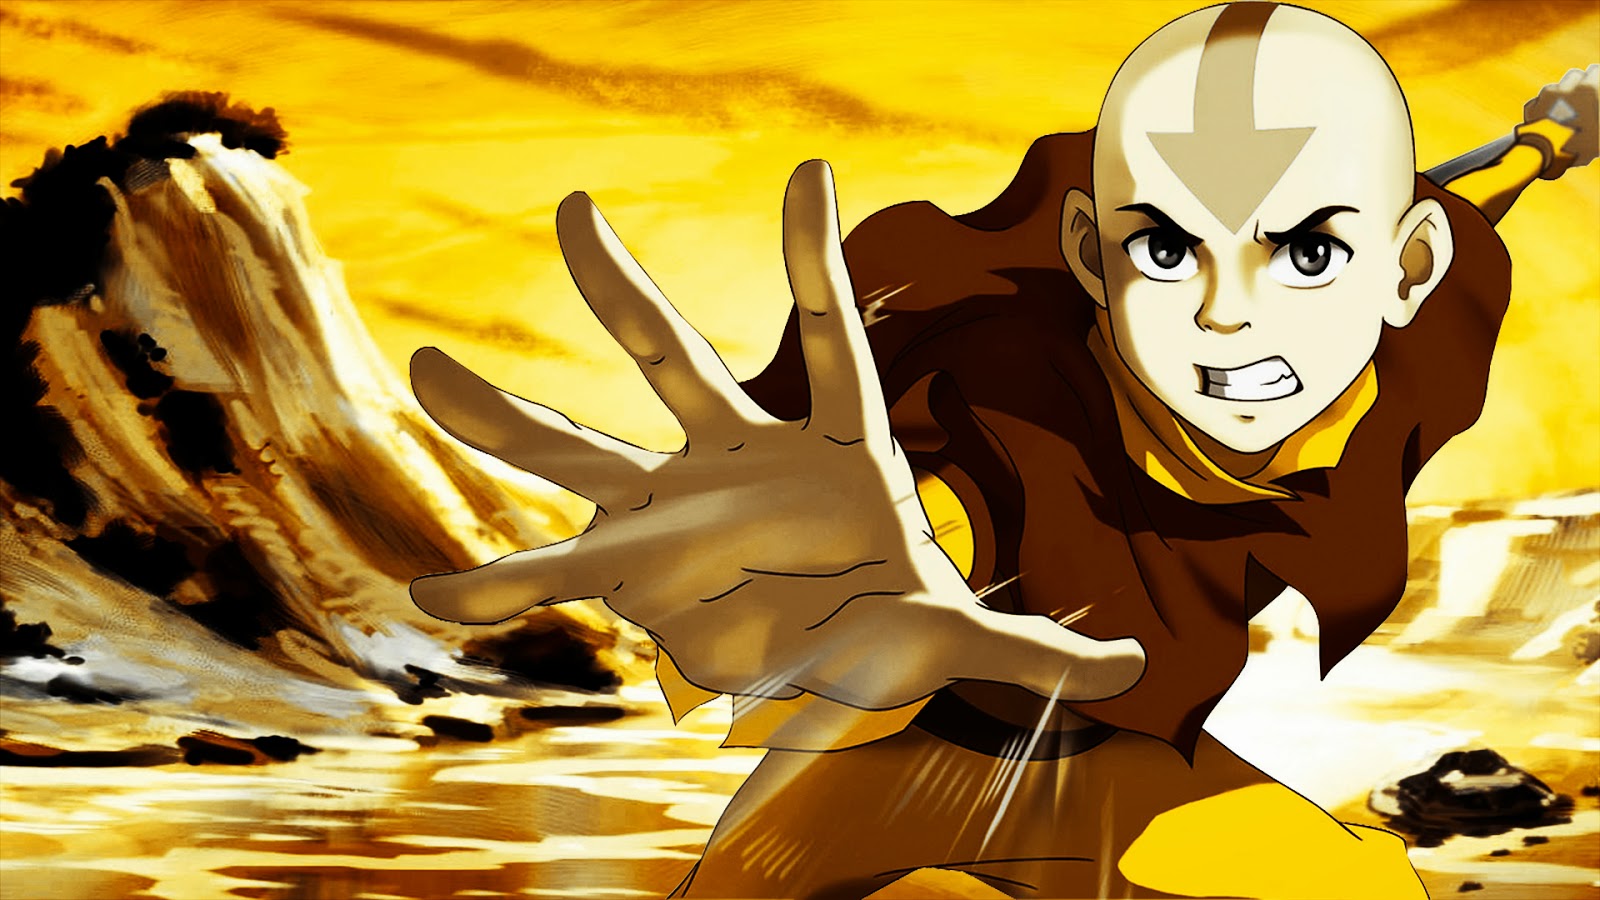 Avatar the legend of aang